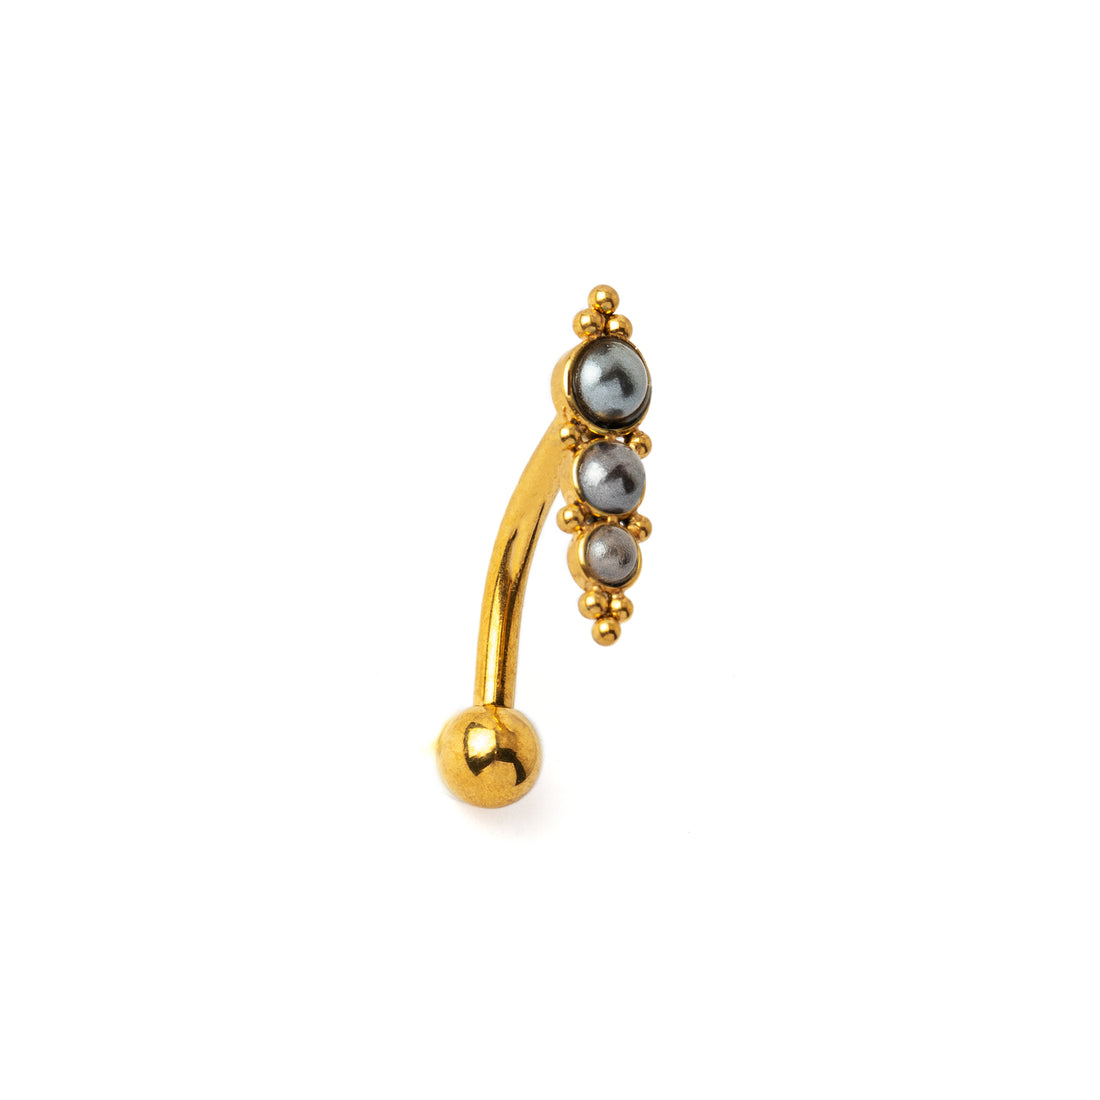 Deva Golden Navel Piercing with Pearls right side view